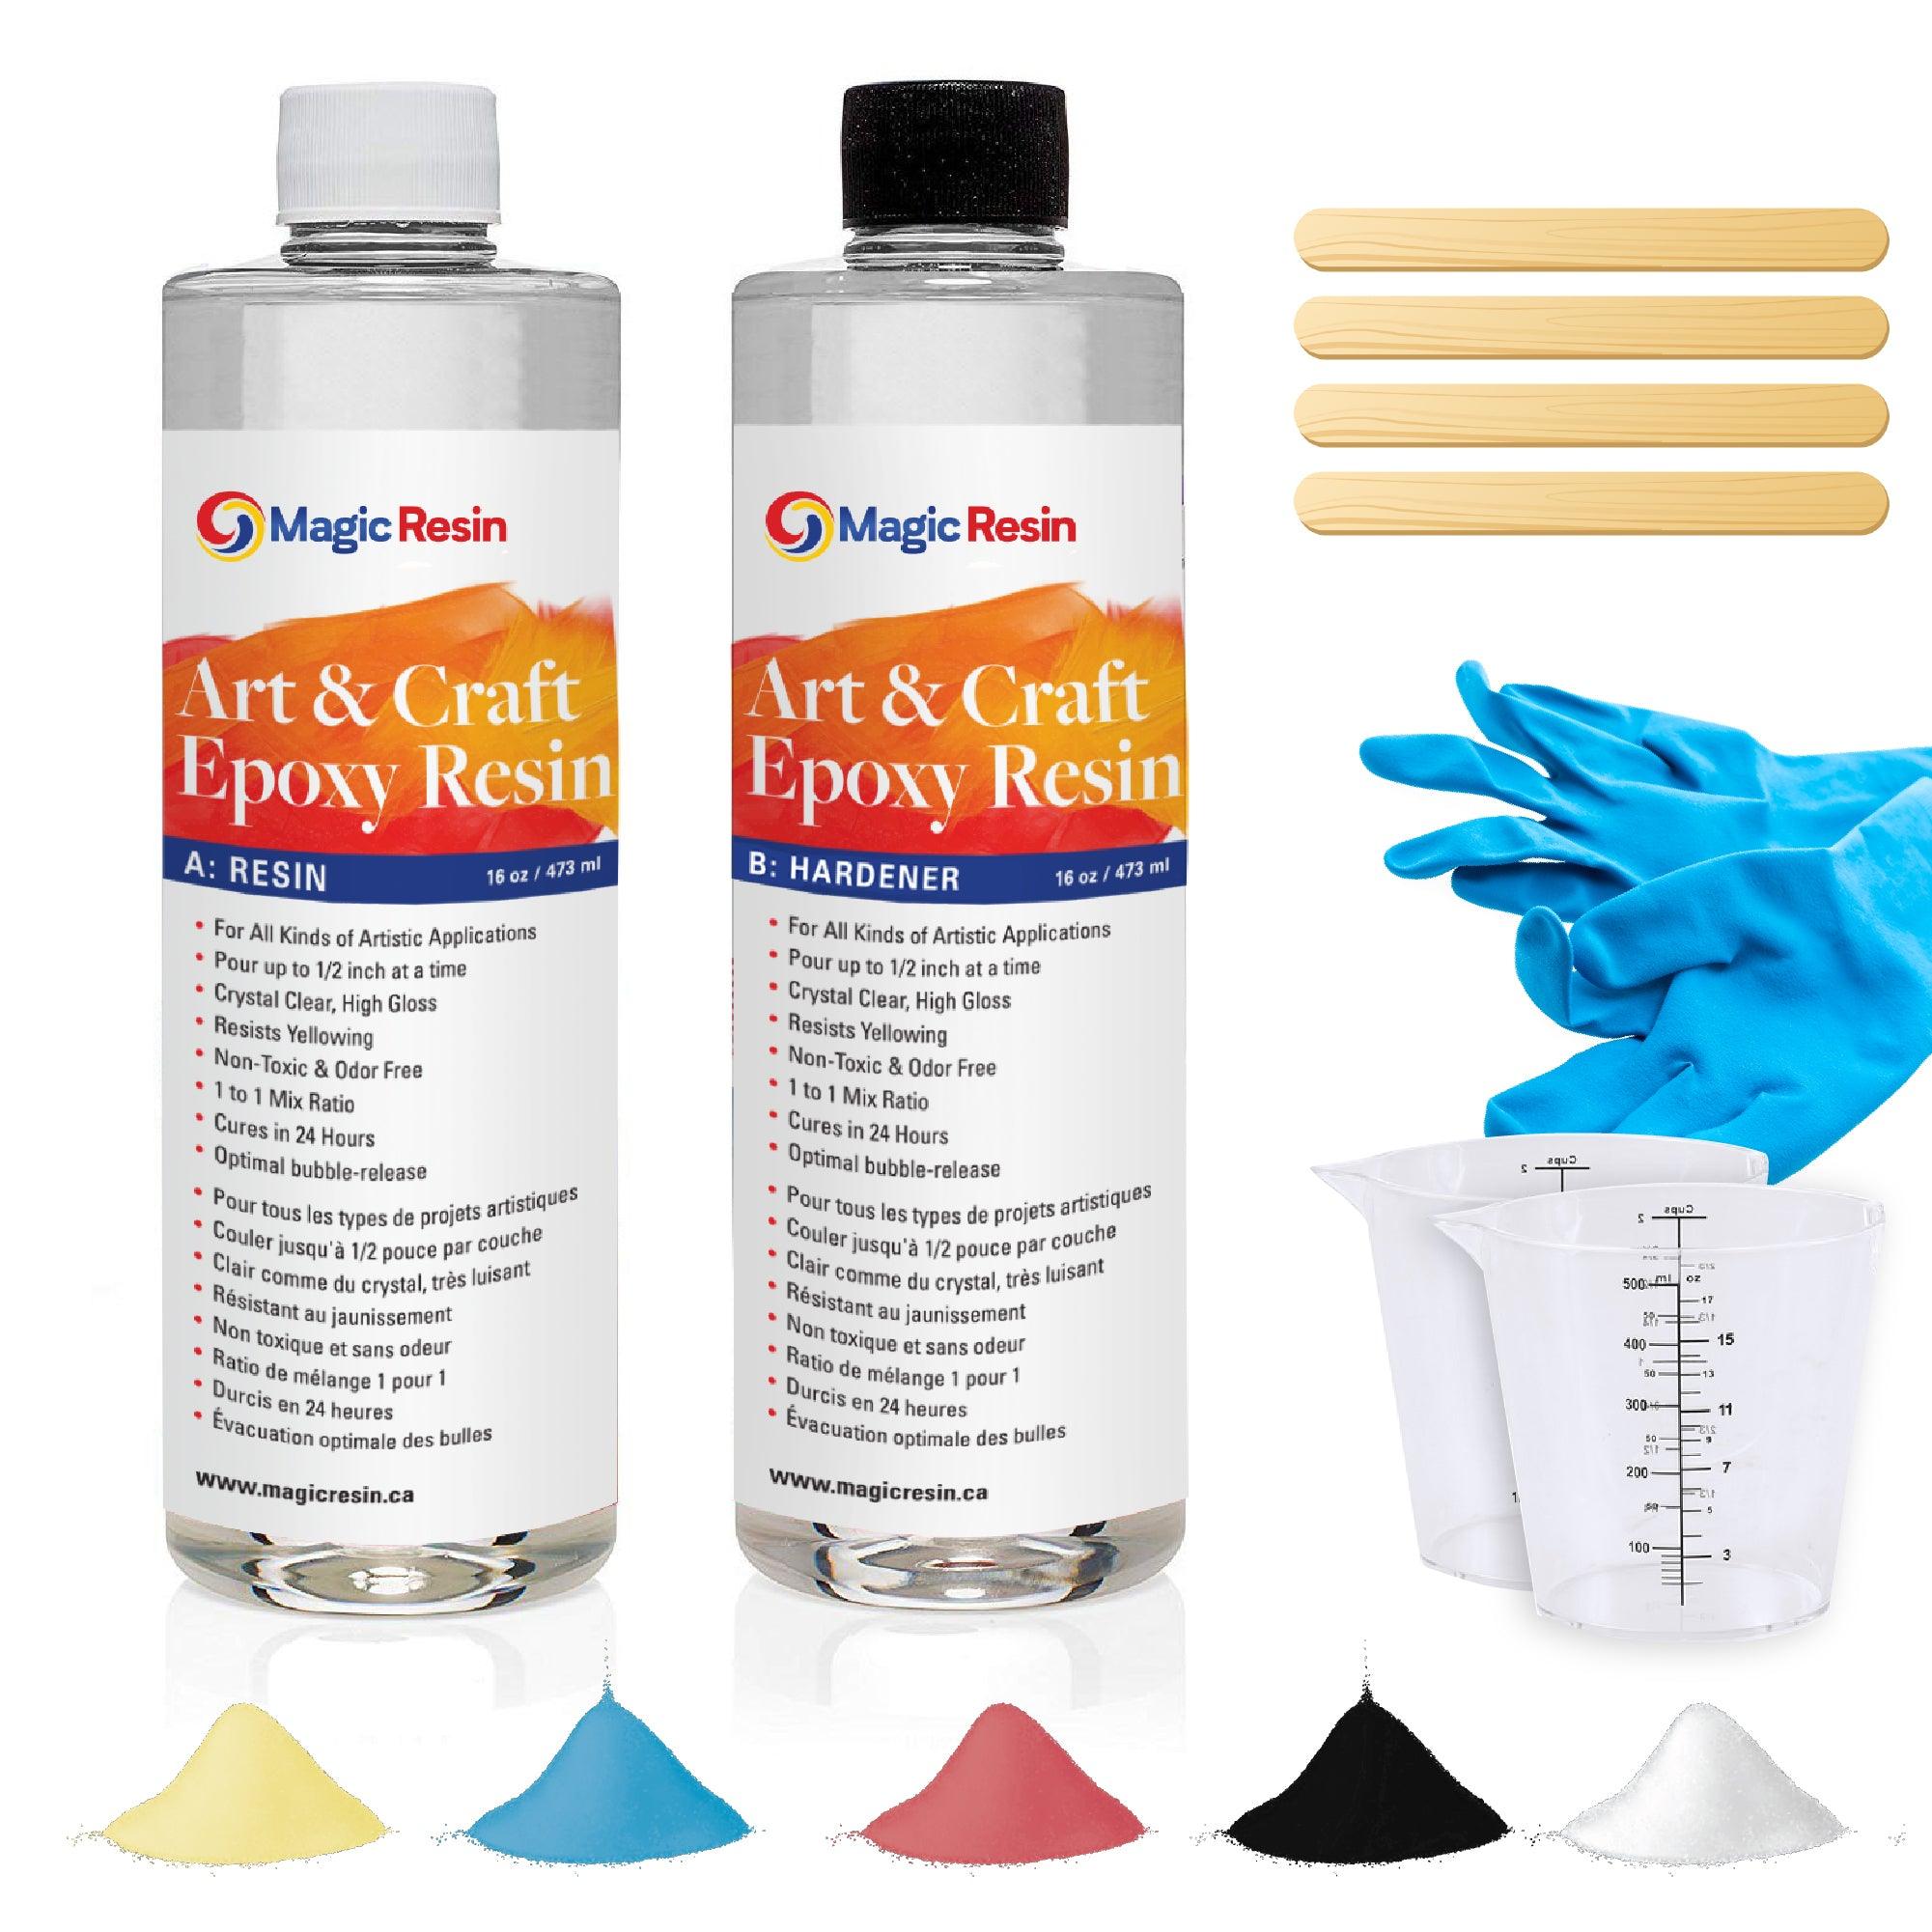 32 Oz (946 ml) | Art & Craft Epoxy Resin Kit | Includes 3 pairs of gloves, 2 cups, 4 sticks & 5 x 5g mica powder bags | Free express shipping - Magic Resin USA